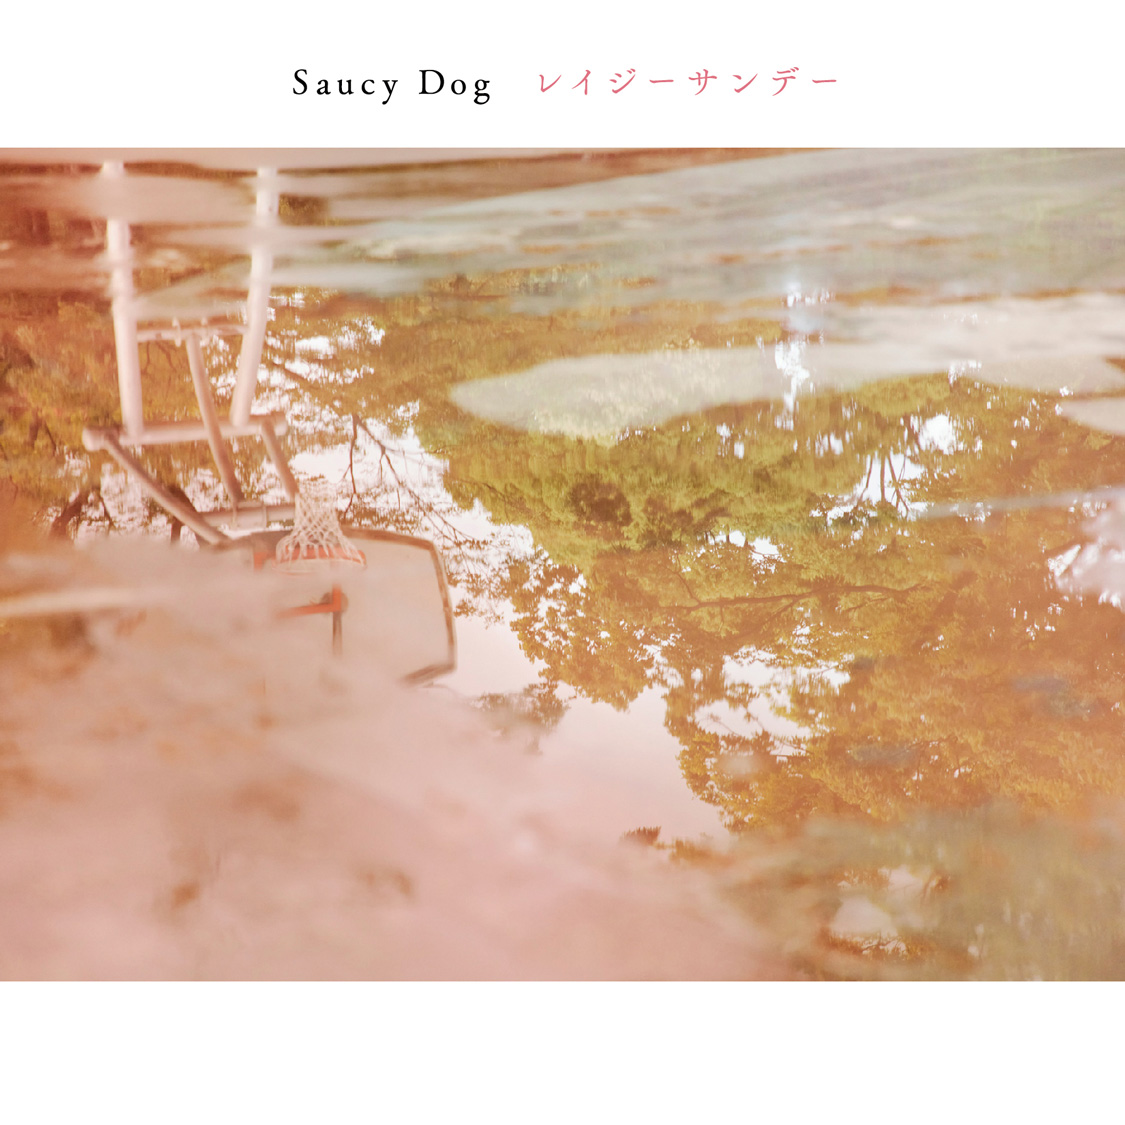 Saucy Dog CD 「ロケット/世界の果て」 - 邦楽